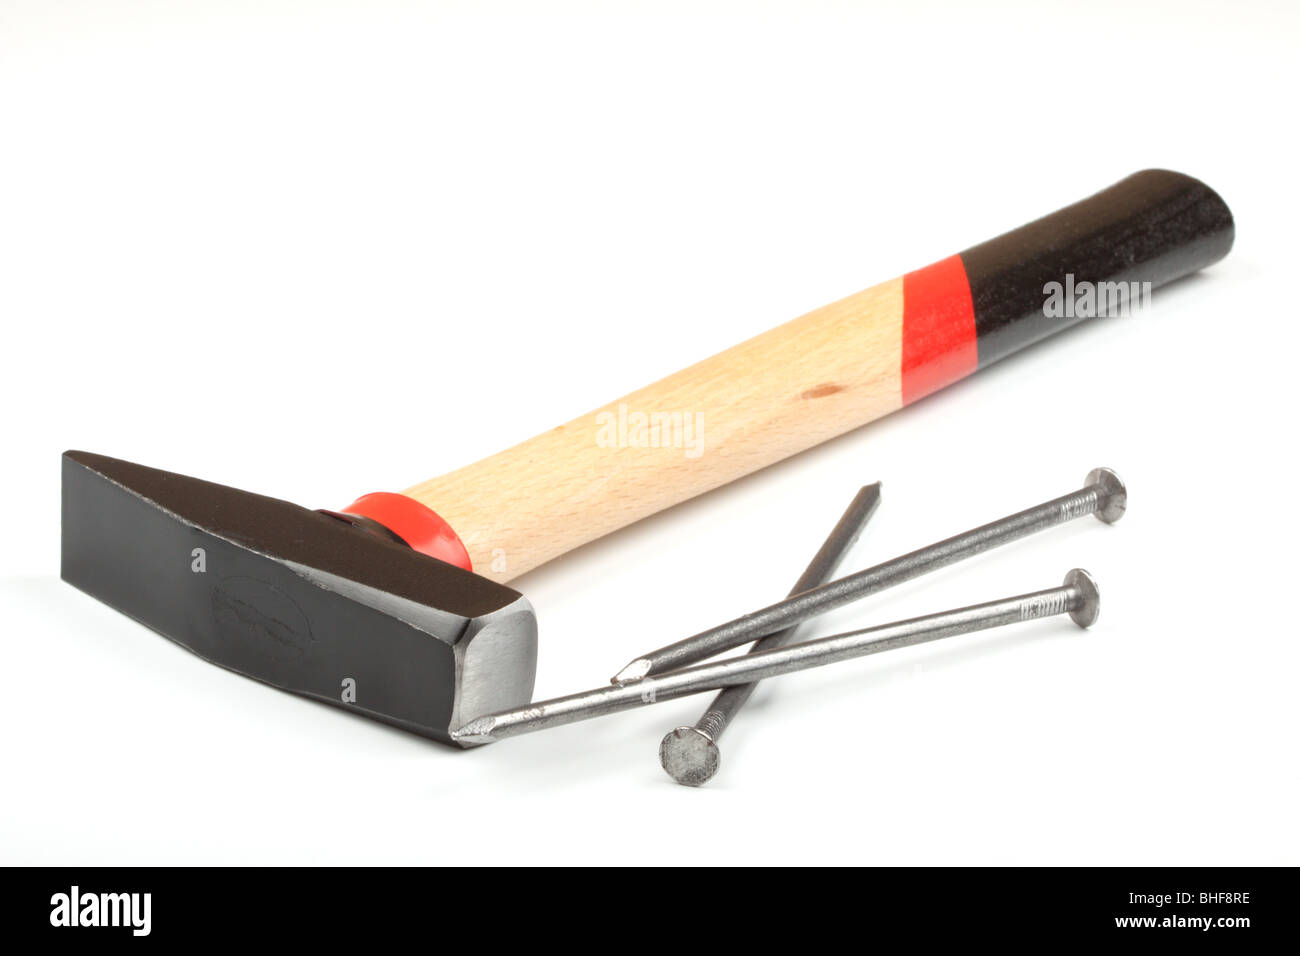 Hammer and nails on a white background Stock Photo